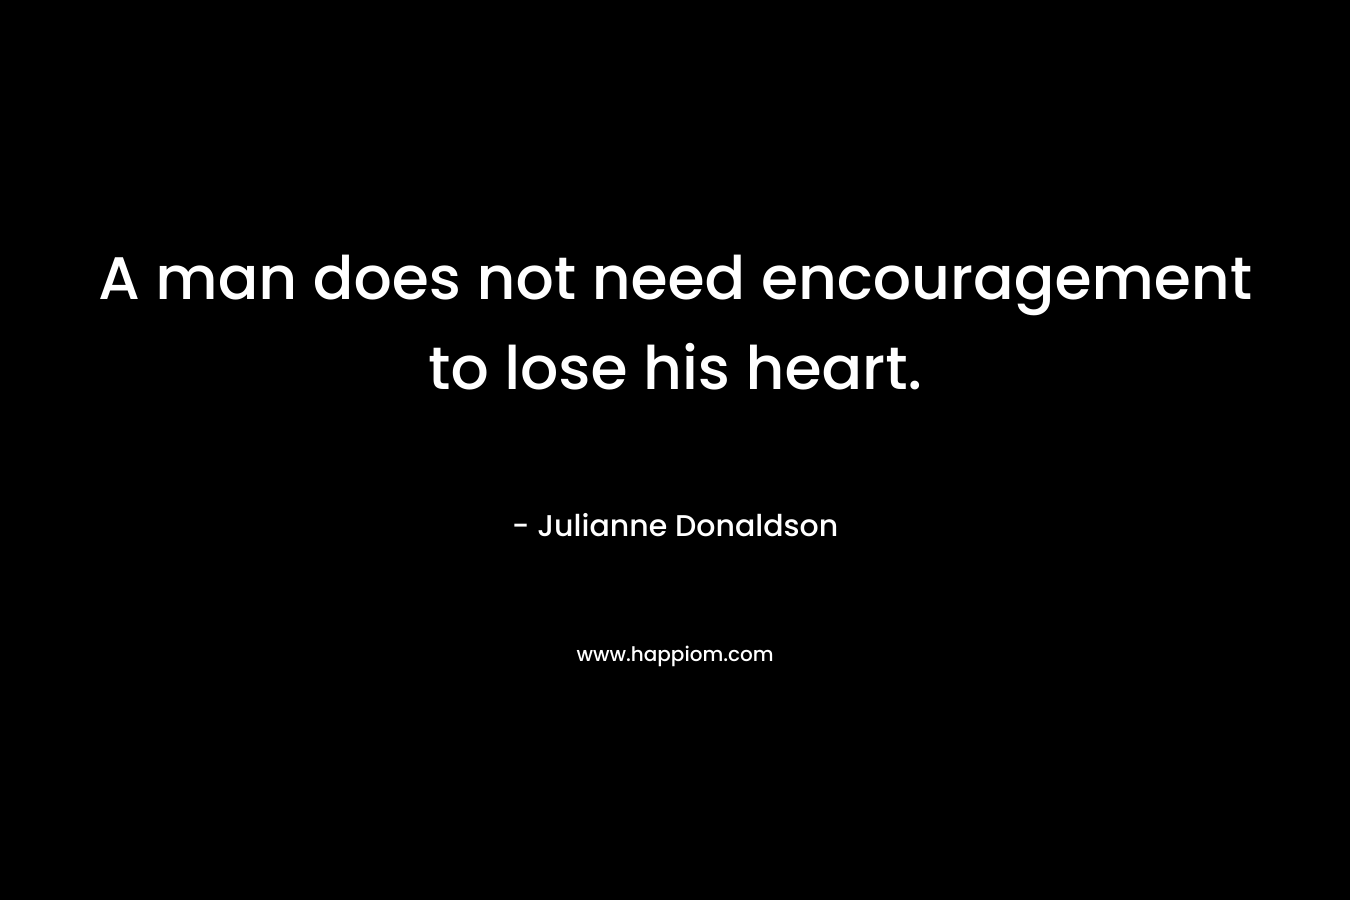 A man does not need encouragement to lose his heart.